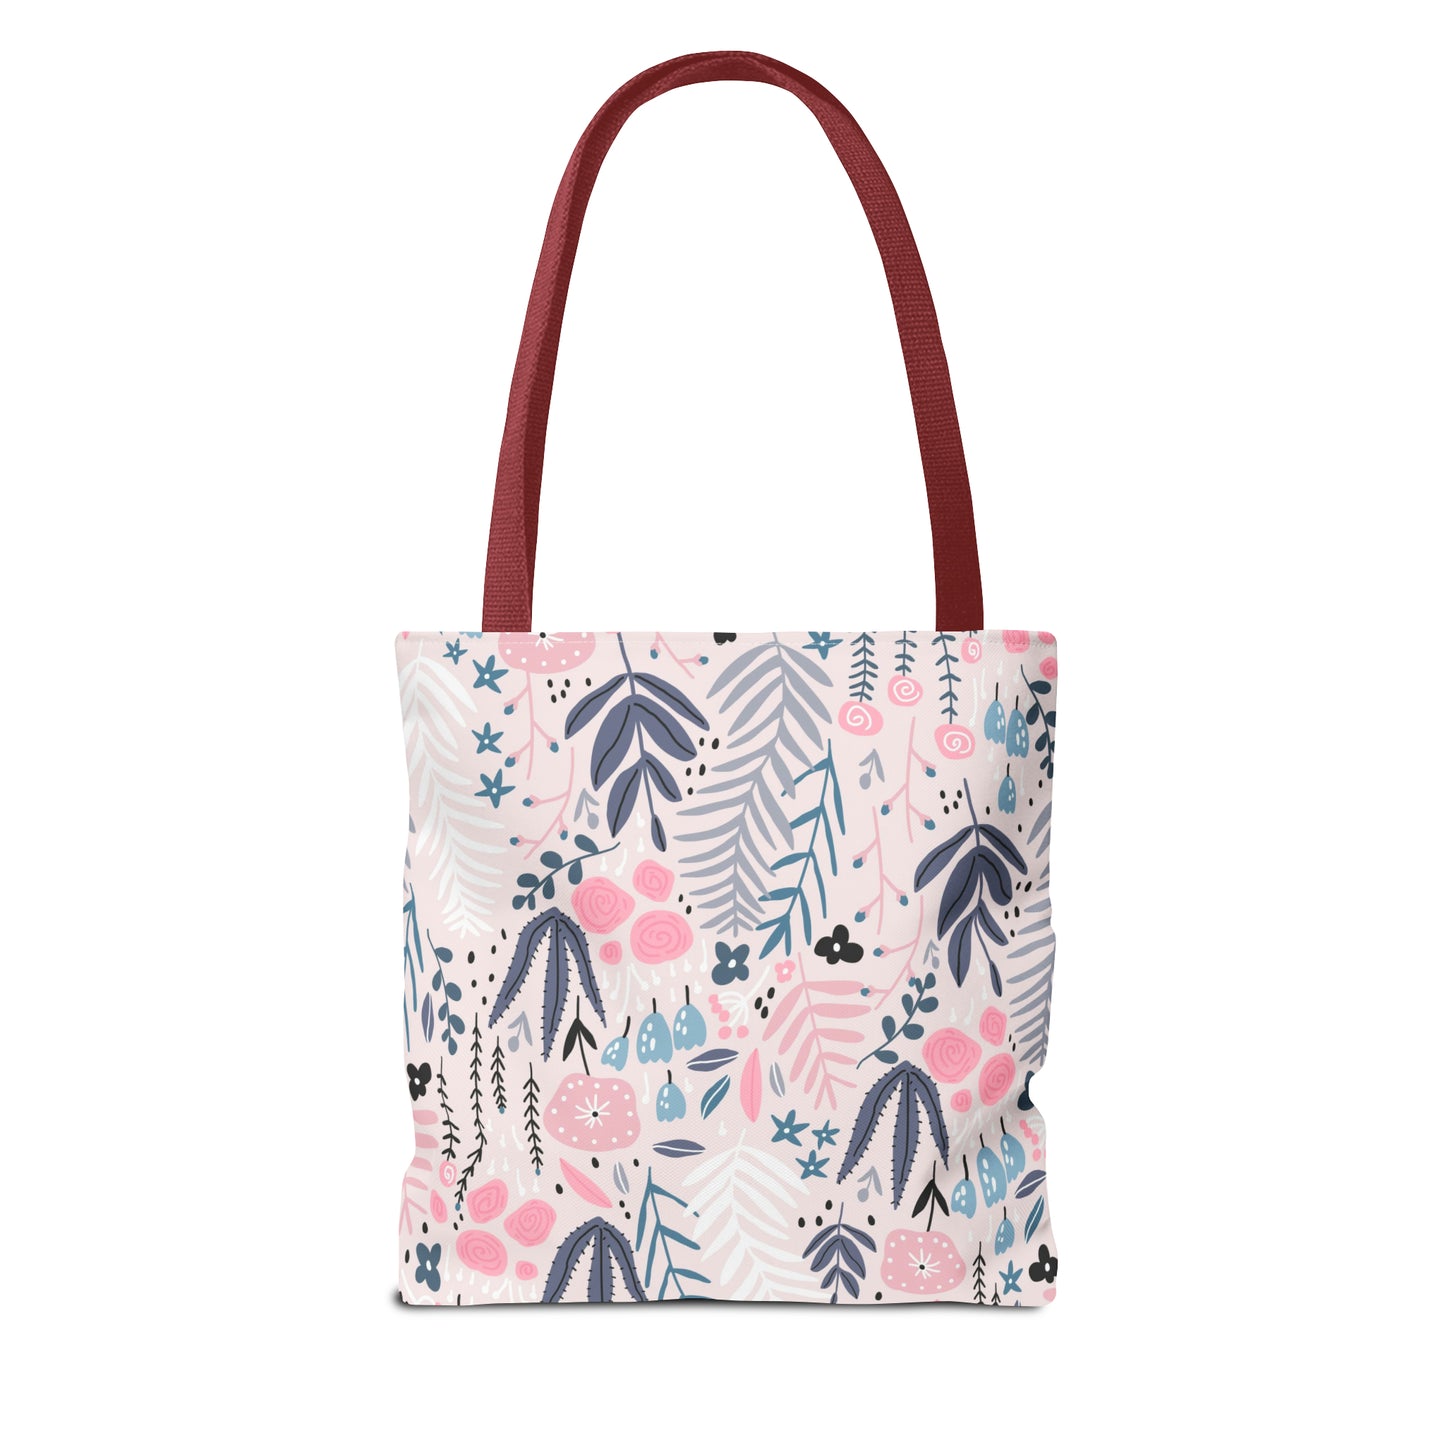 Vibrant Blossom Carryall - Floral Tote Bag